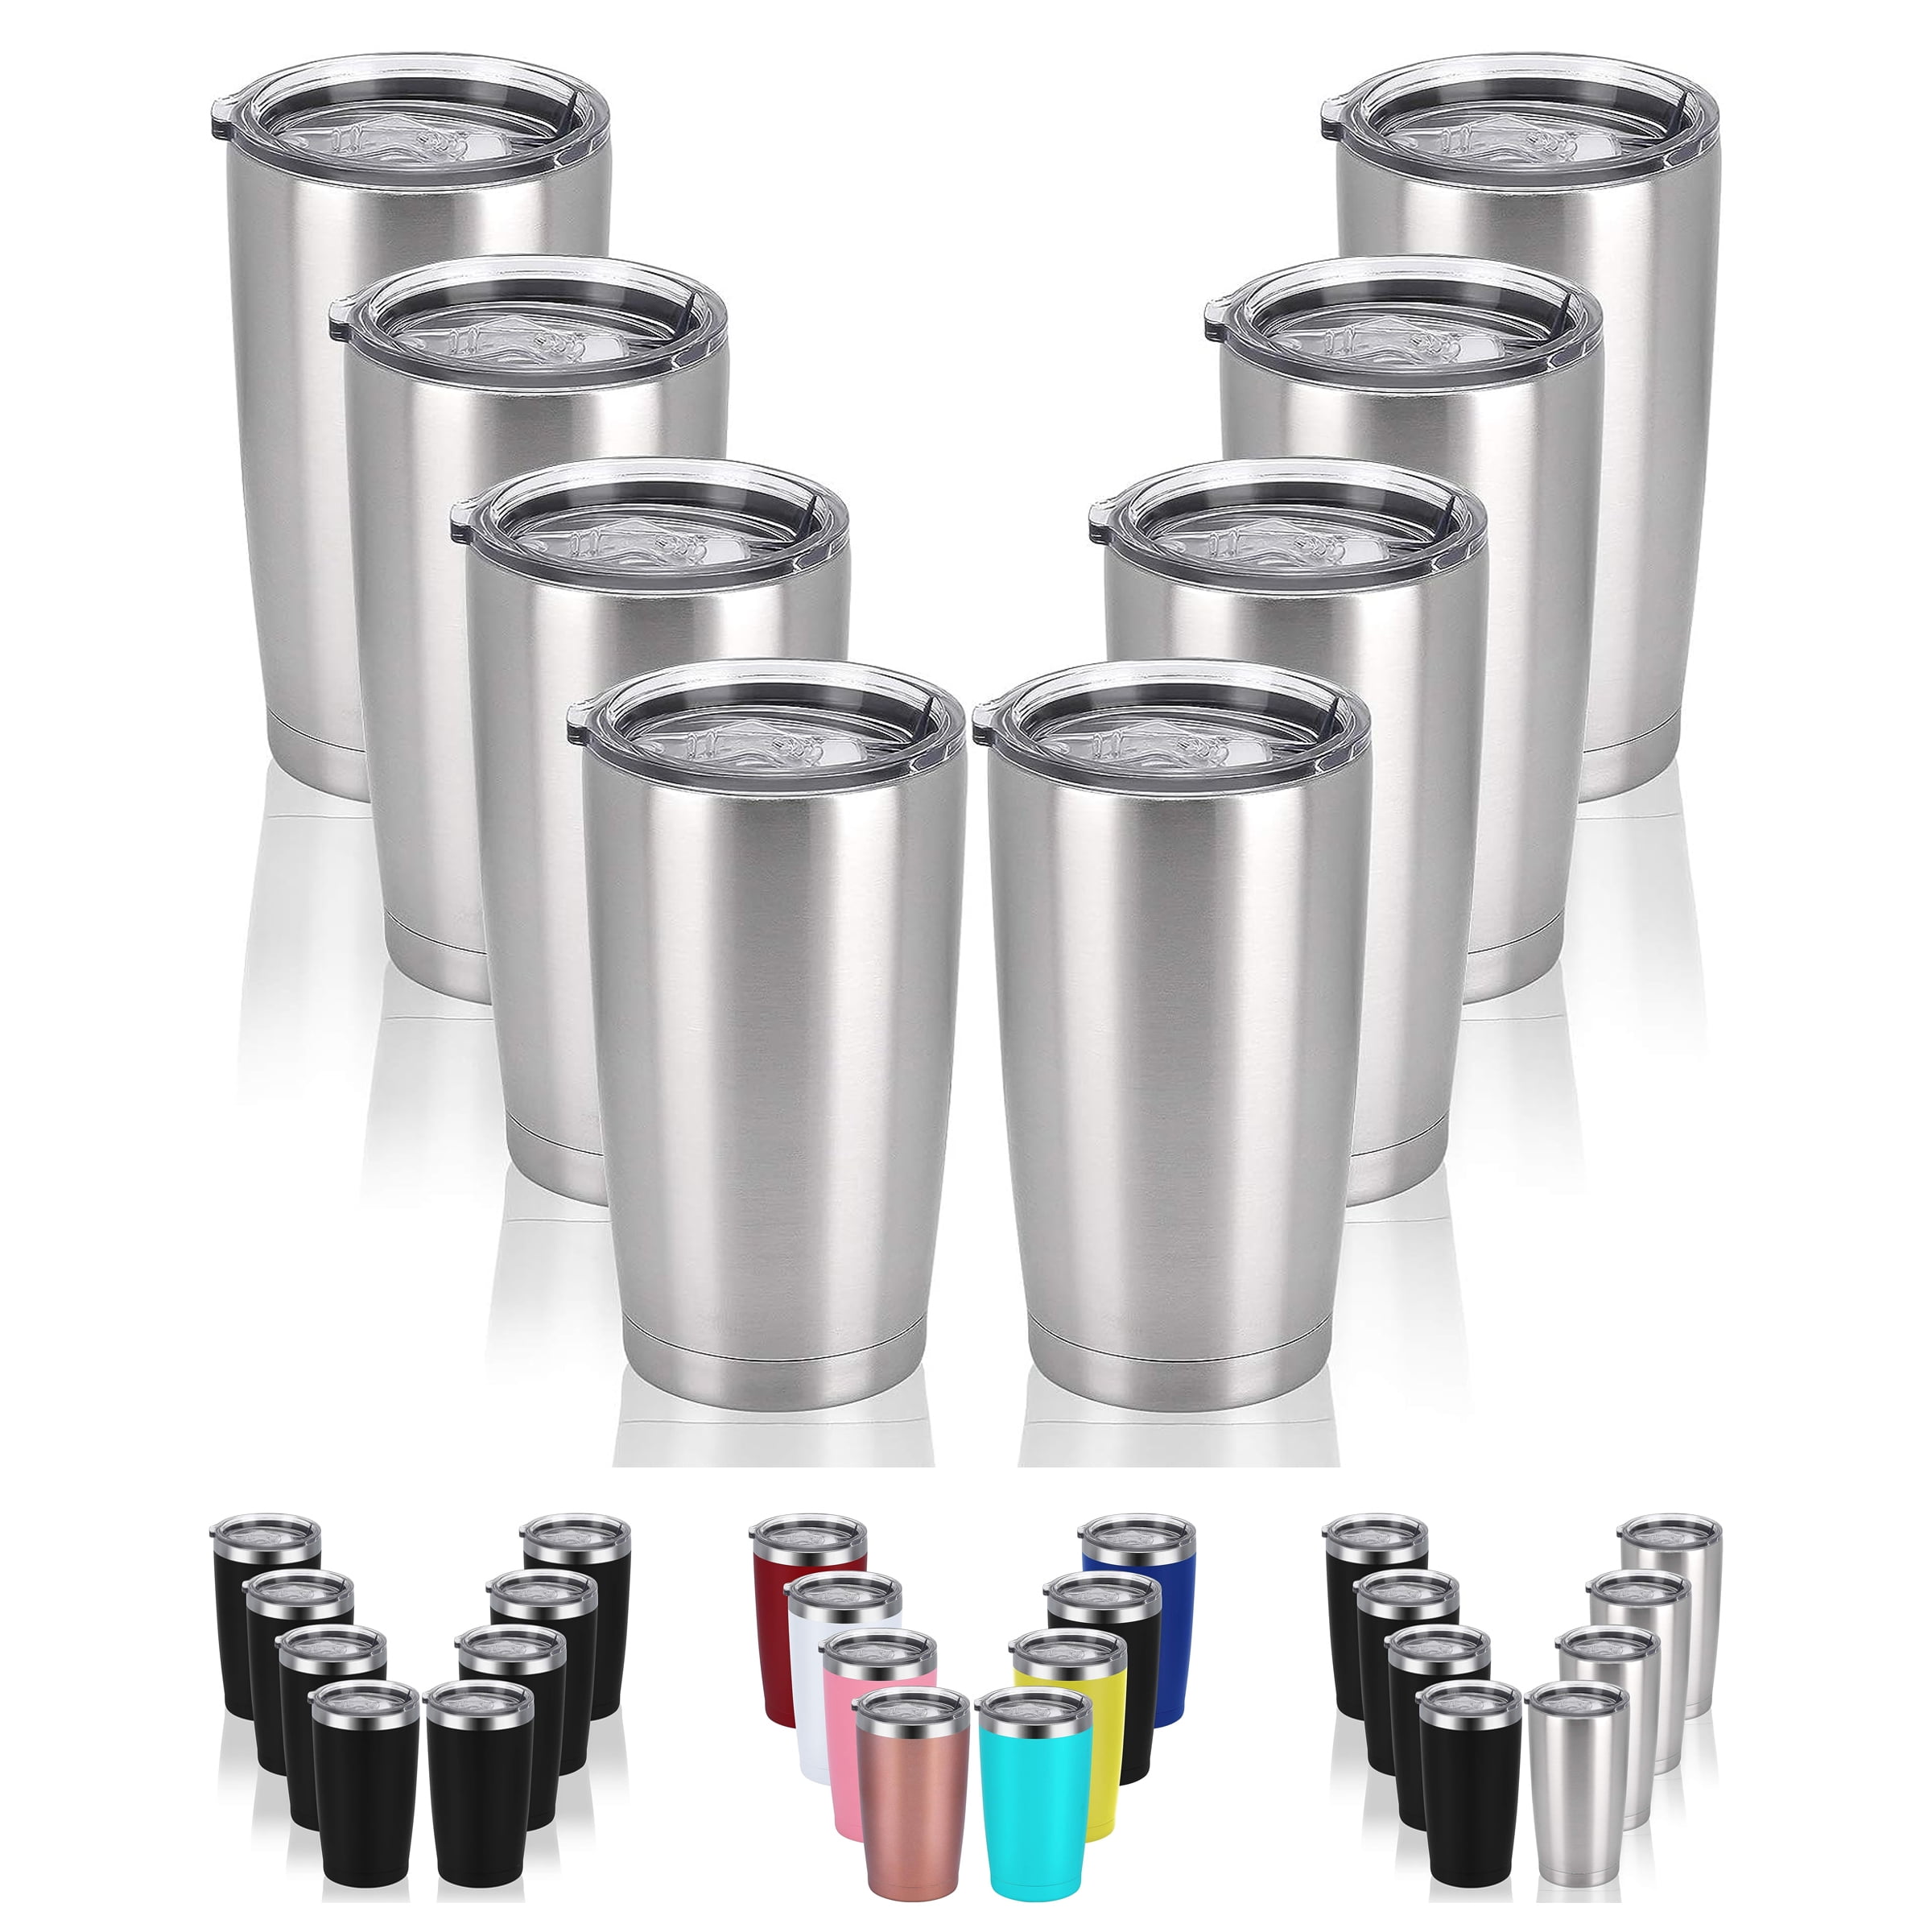 Gingprous 8 Pack 20 oz Stainless Steel Travel Tumblers with Lids